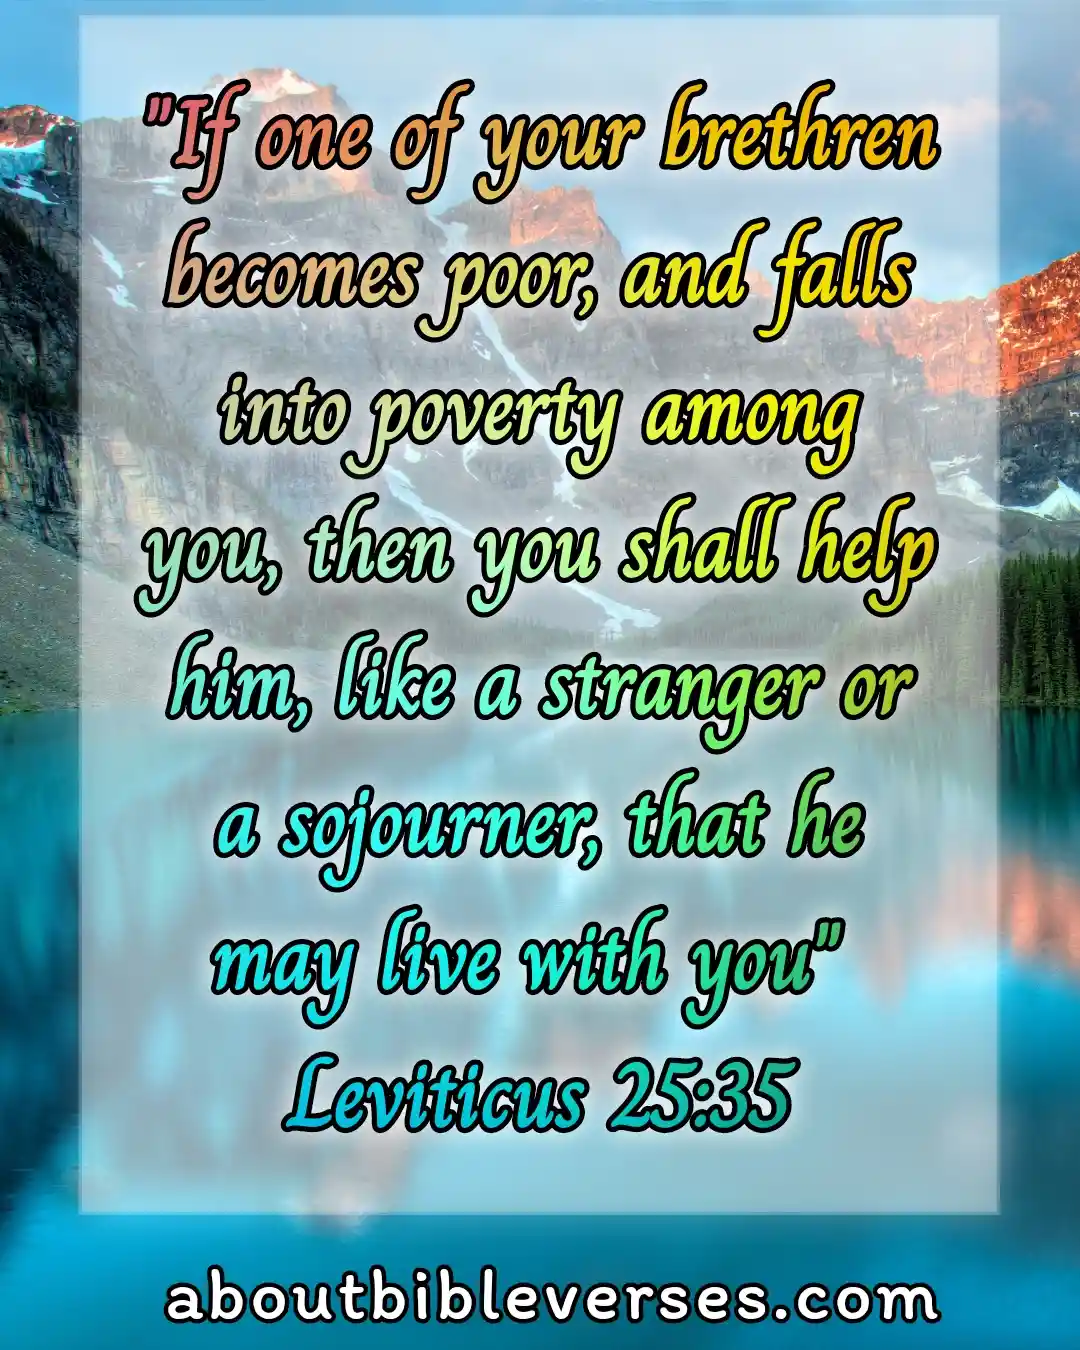 today bible verse (Leviticus 25:35)